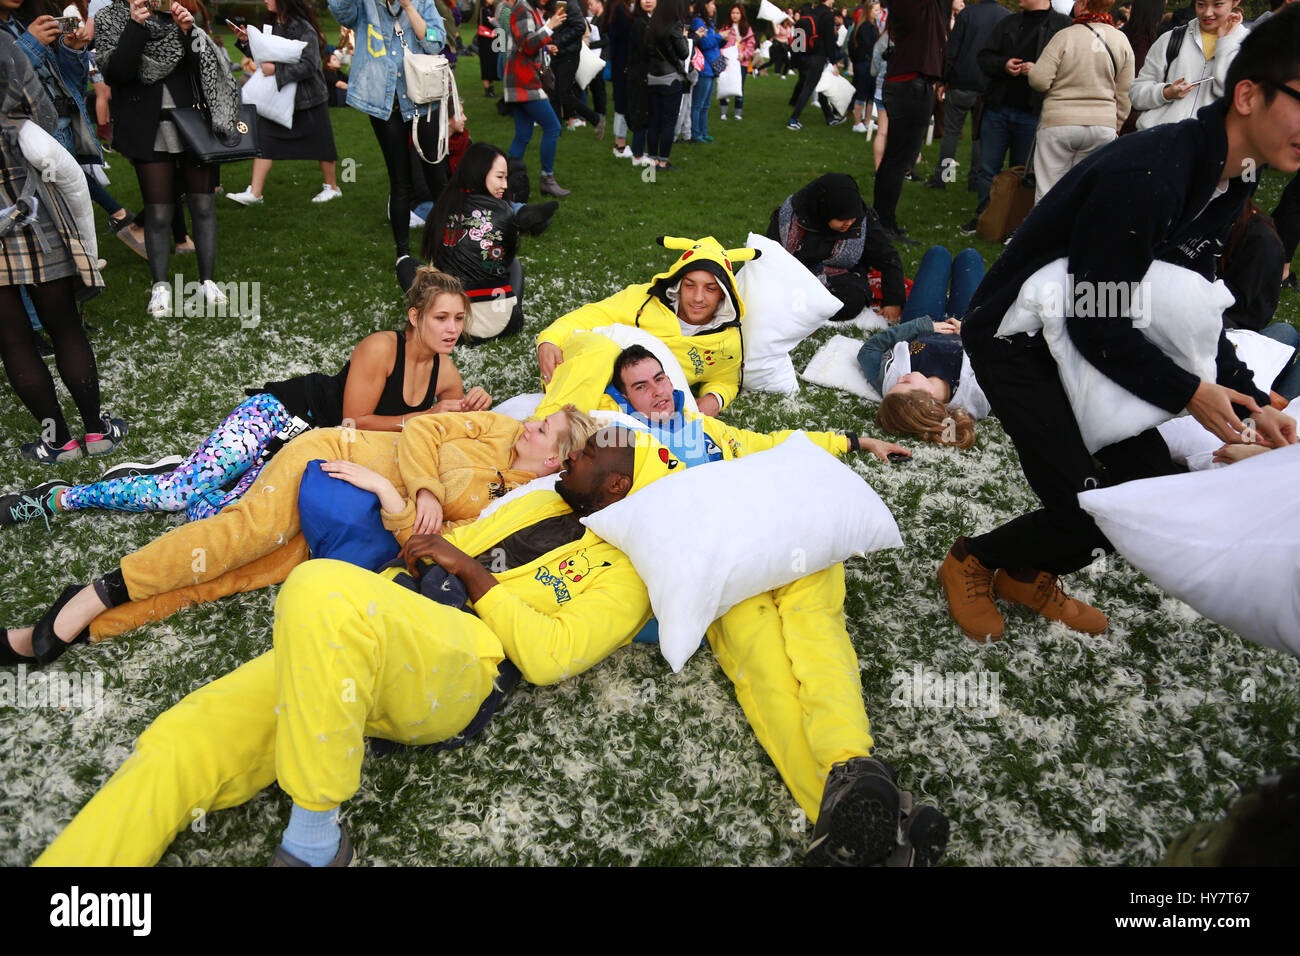 London, UK. 01st Apr, 2017. People take a rest after pillow-fighting on World Pillow Fight Day, in Kennington Park, London, UK, on April 1, 2017. Credit: Paul Marriott/Alamy Live News Stock Photo